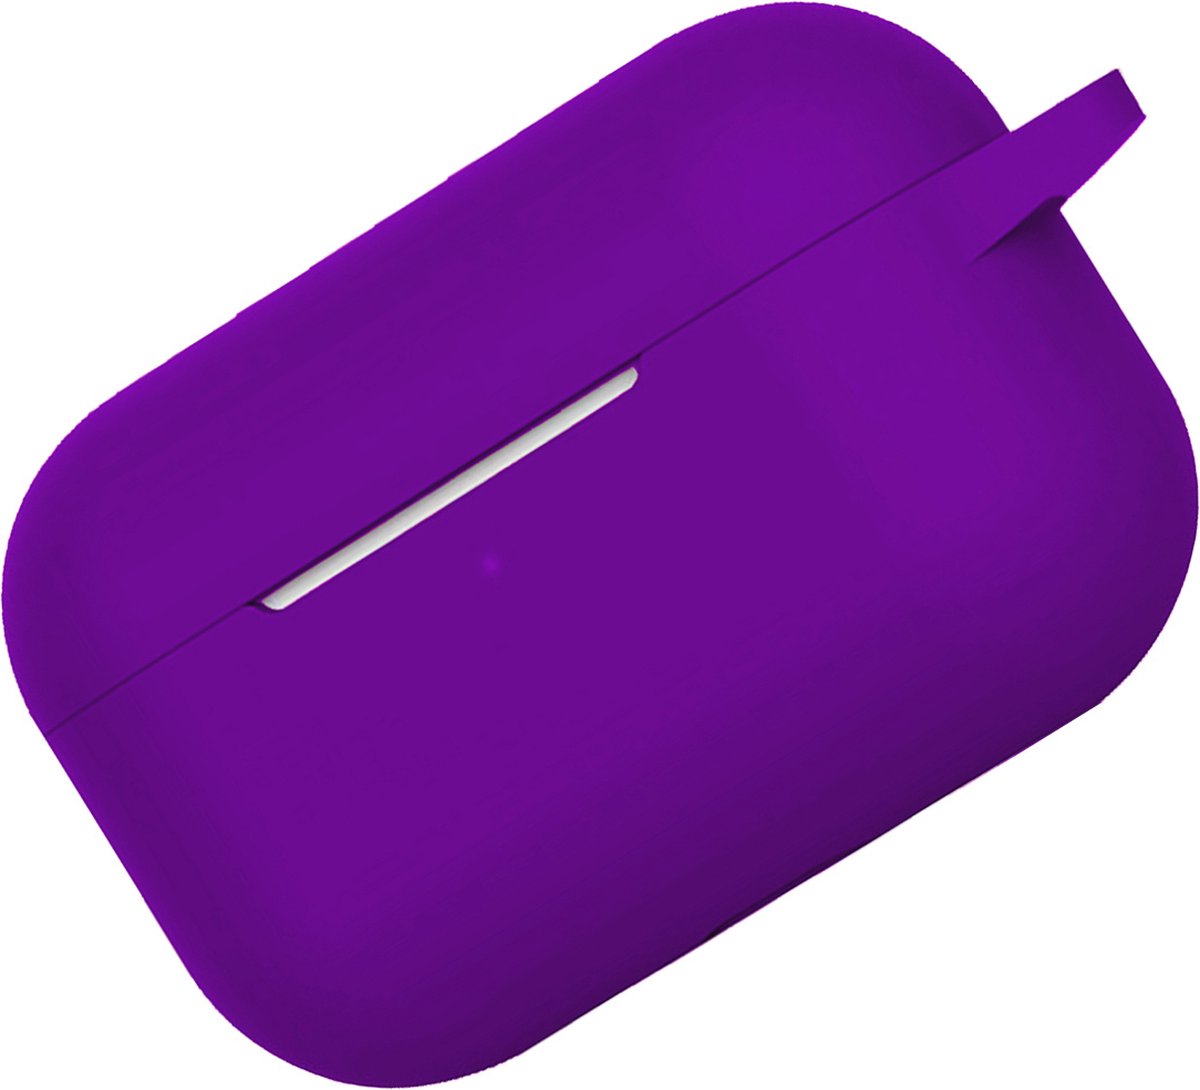 Hoes Geschikt voor Airpods Pro Hoesje Cover Silicone Case Hoes - Paars